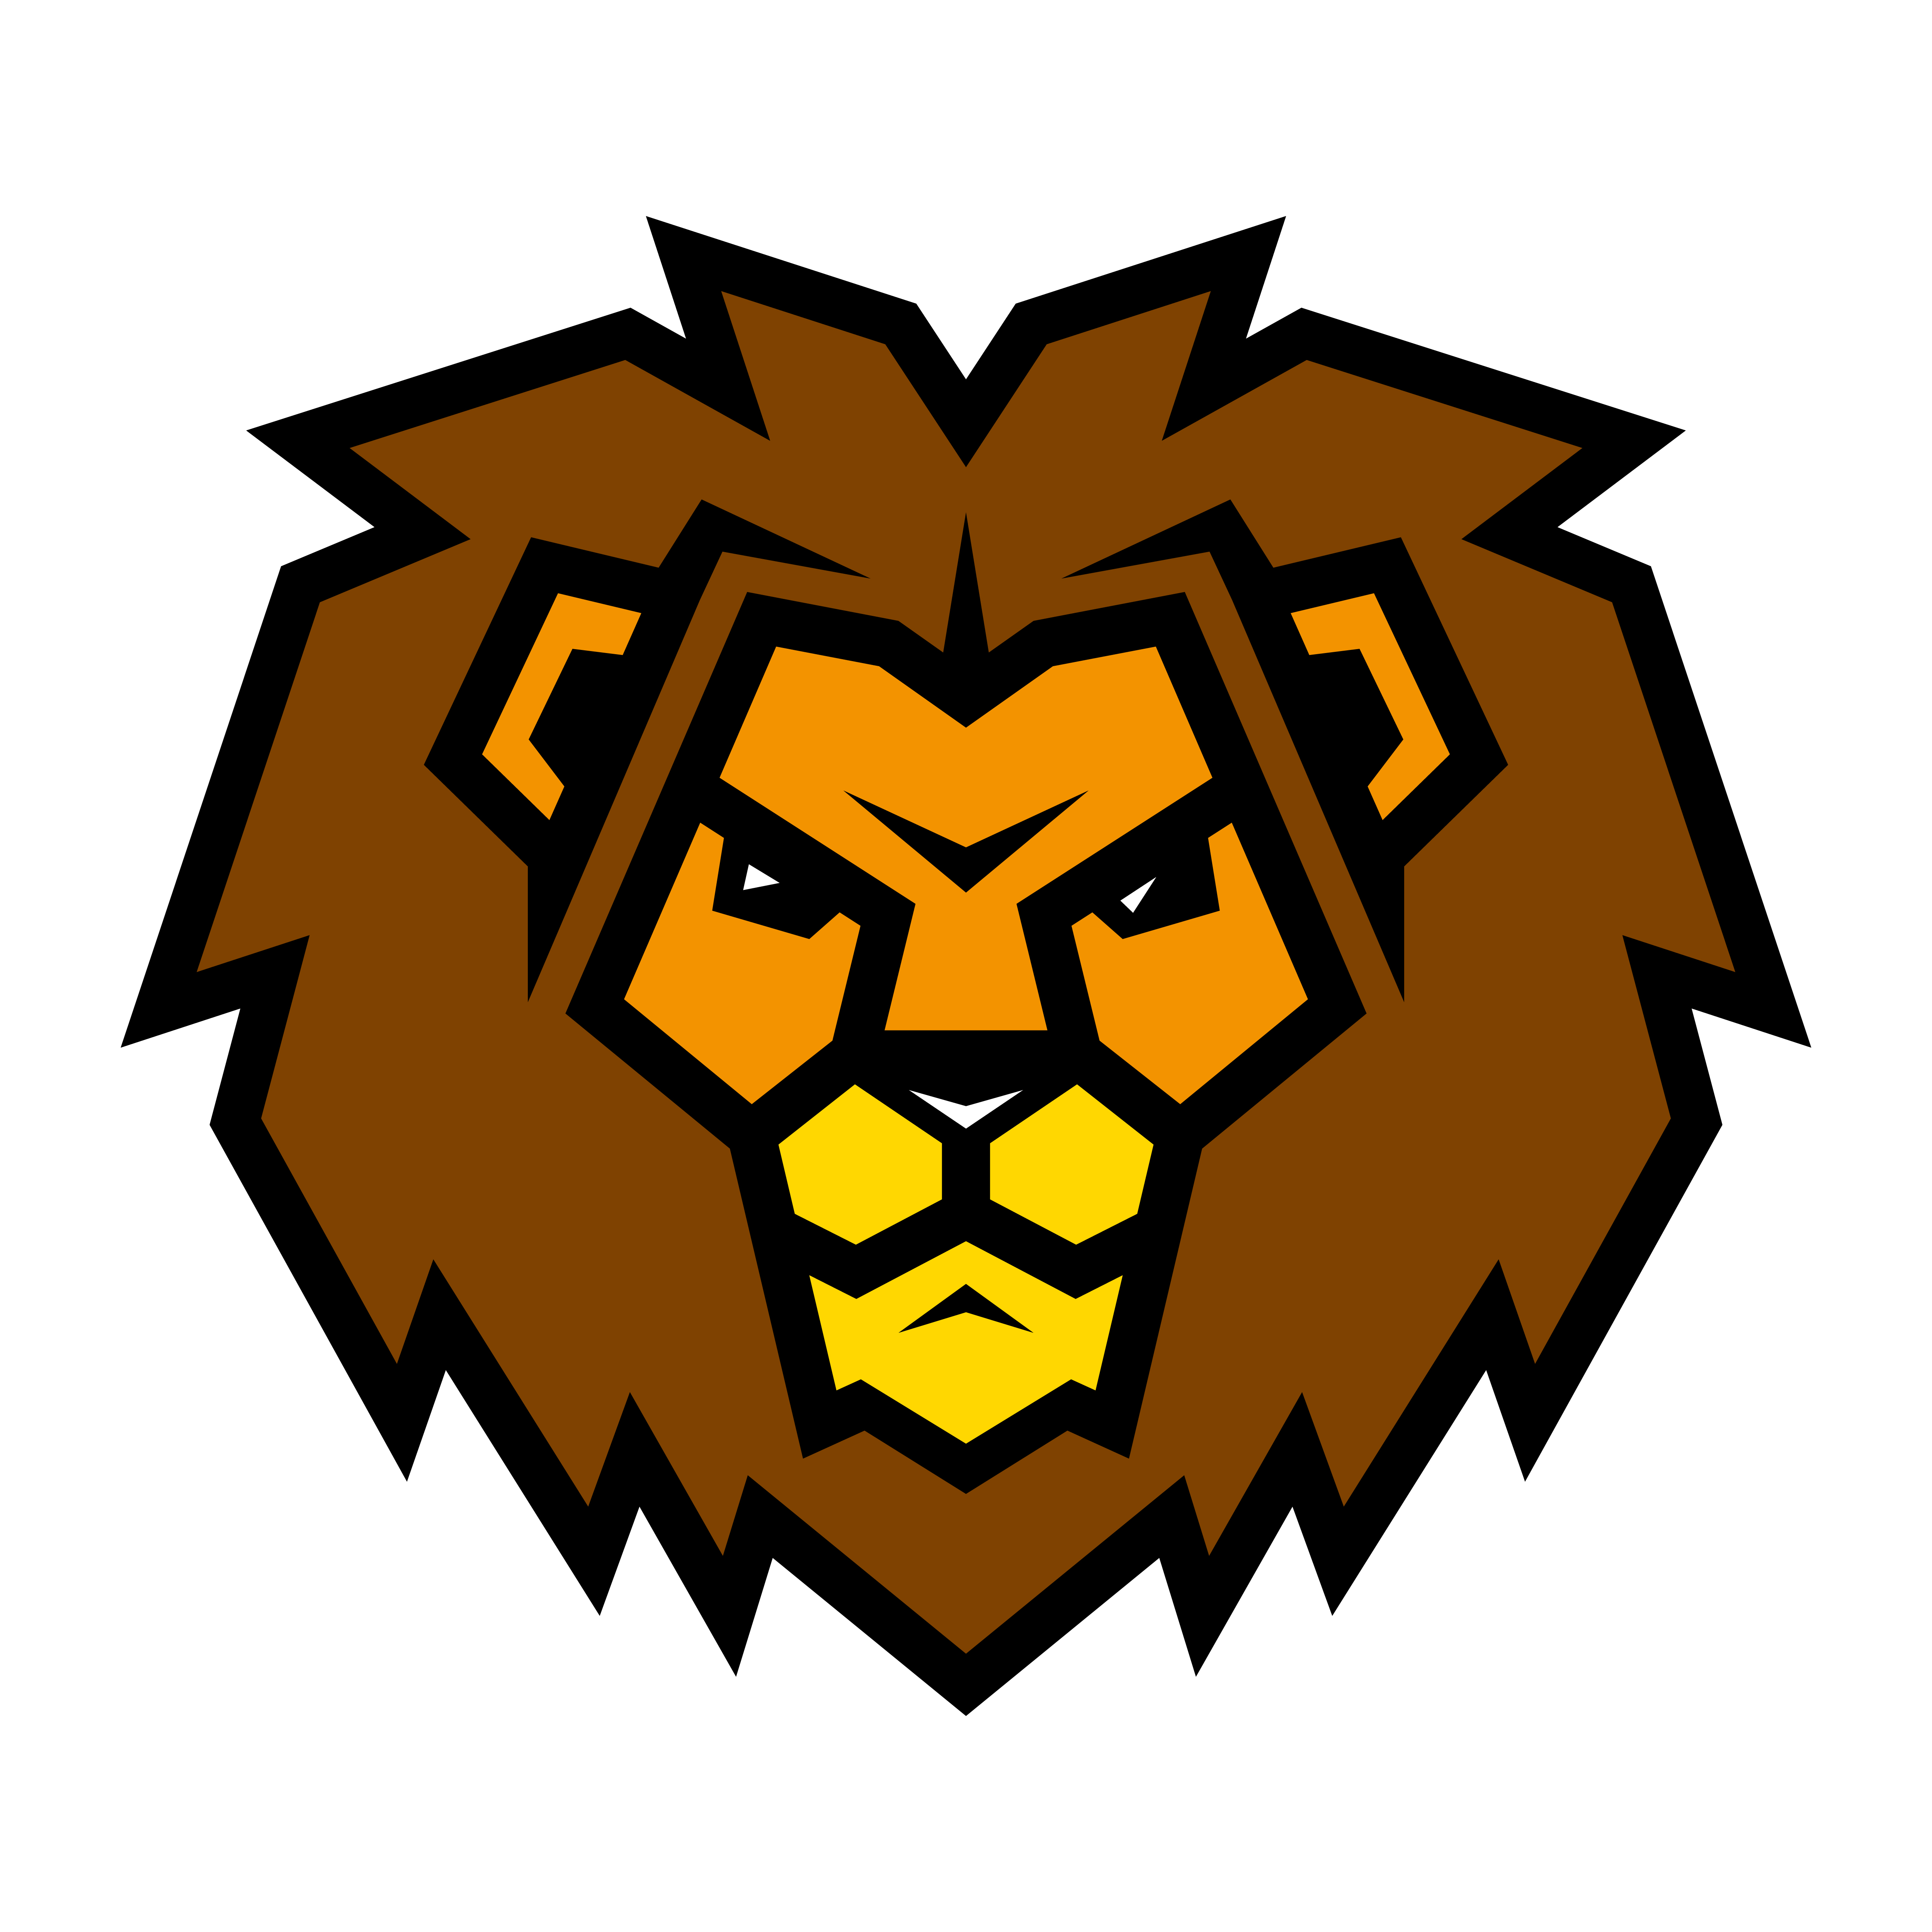 Lion Icon Free Vector Art - (719 Free Downloads)